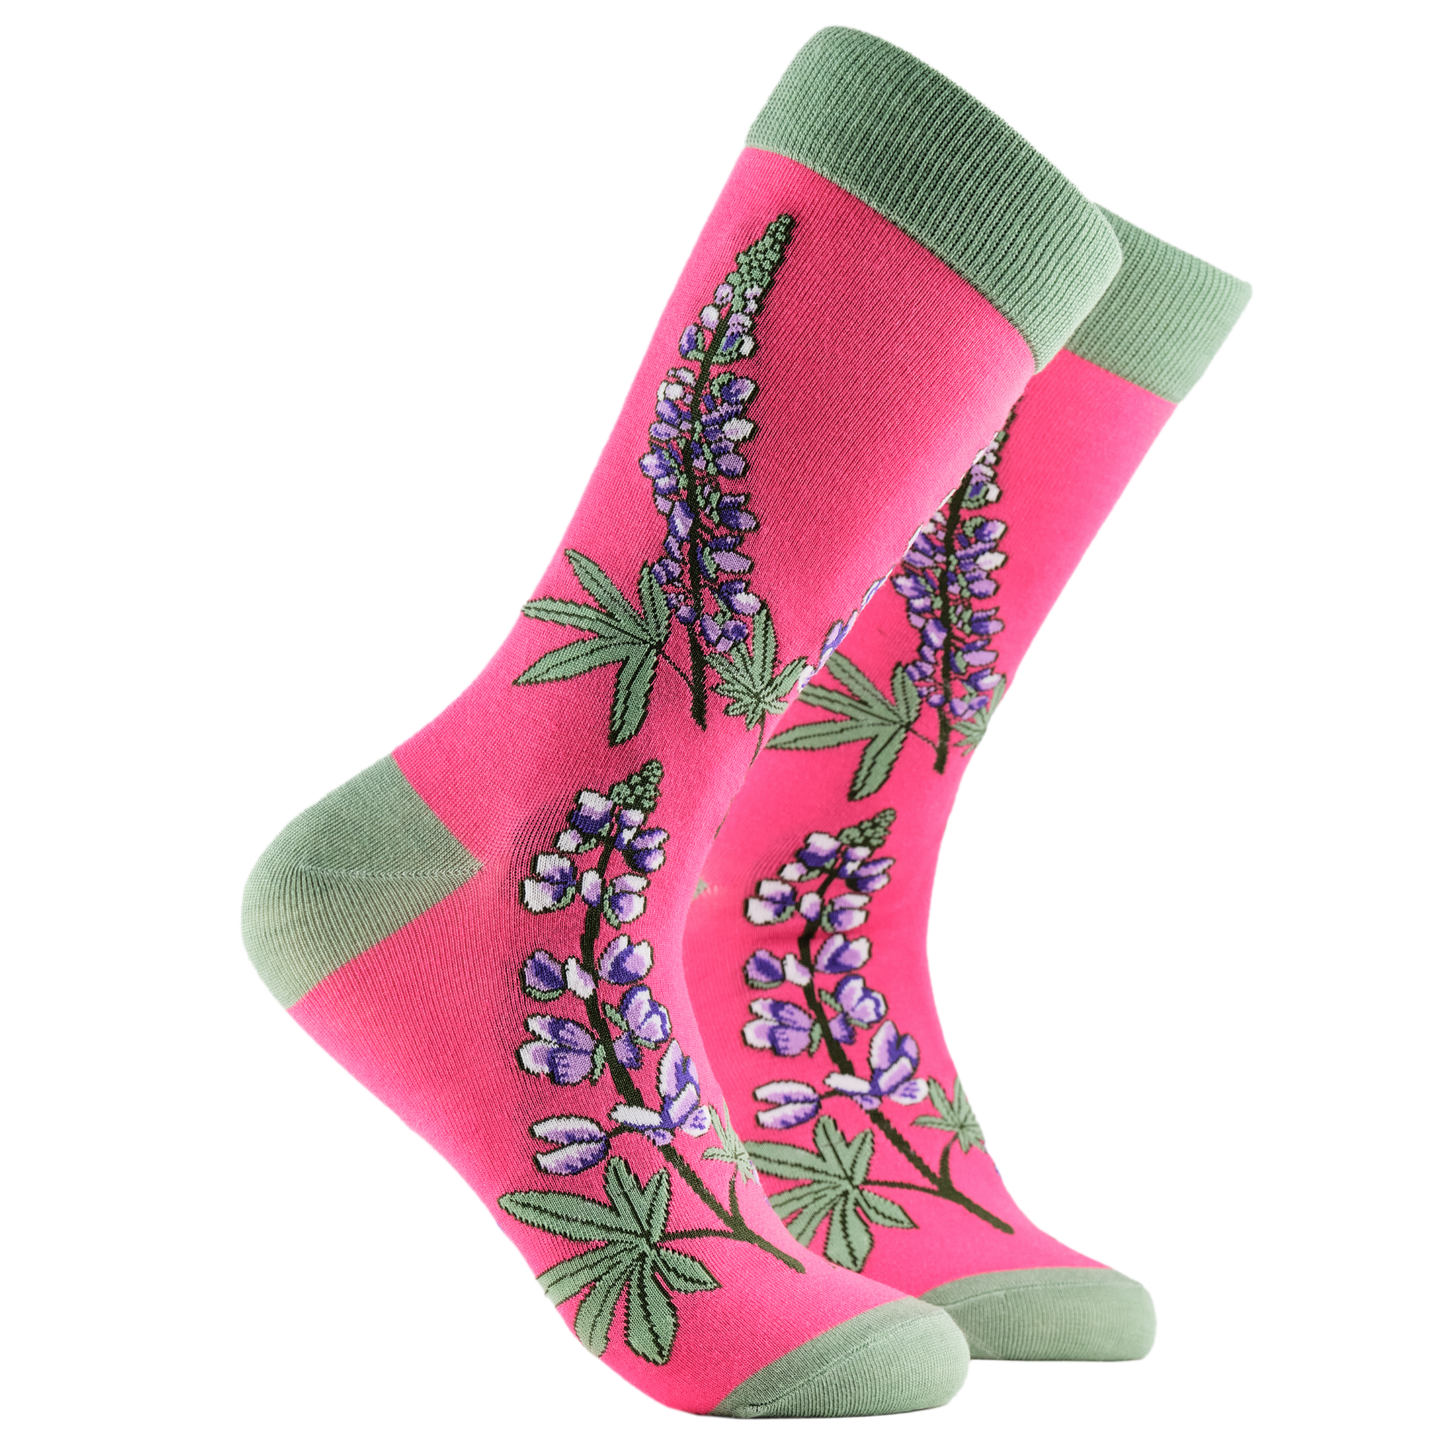 Lupin Floral Bamboo Socks. A pair of socks depicting Lupins. Pink legs, light green cuff, heel and toe.